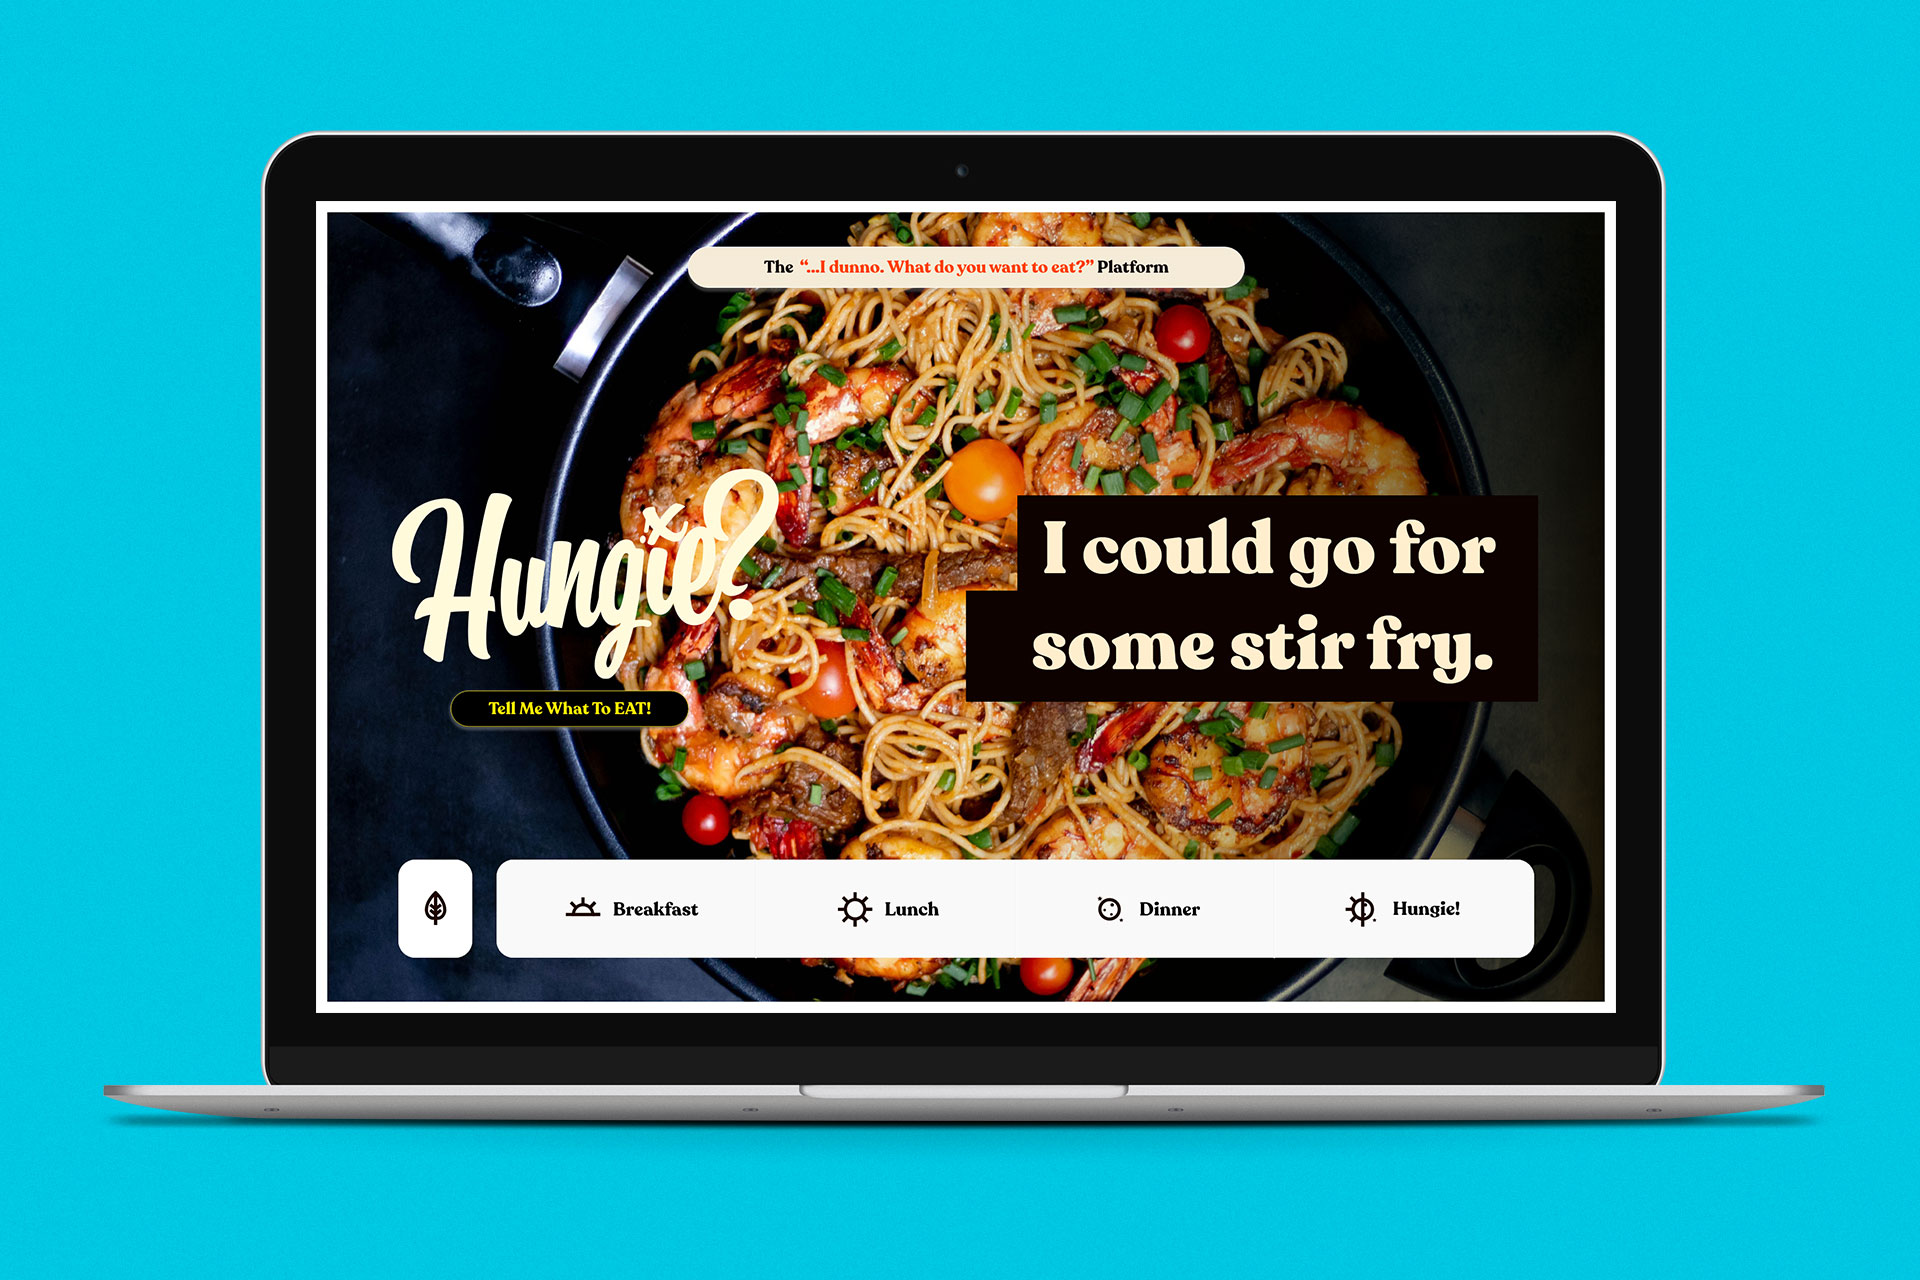 Hungie: The "What to eat?" platform Branding and Web Design